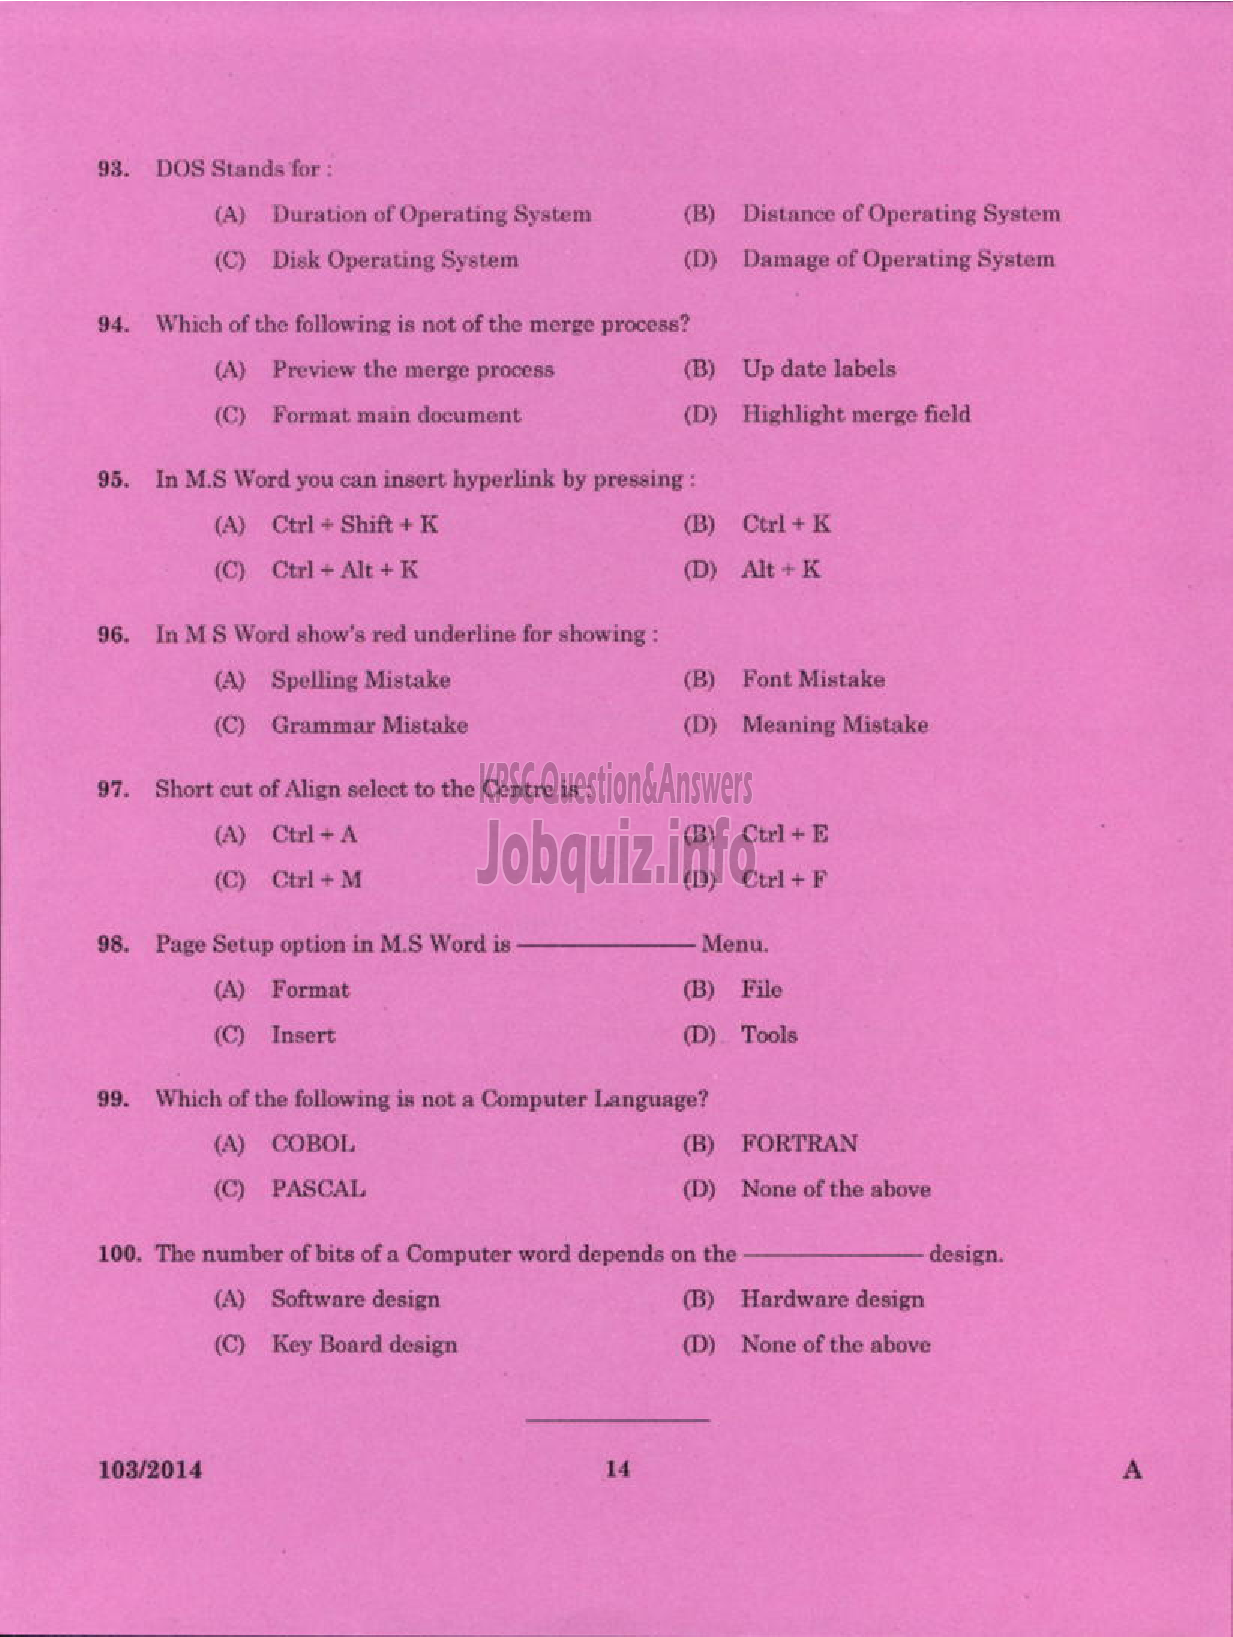 Kerala PSC Question Paper - STENOGRAPHER GRADE IV STEEL AND INDUSTRIAL FORGINGS LIMITED-12